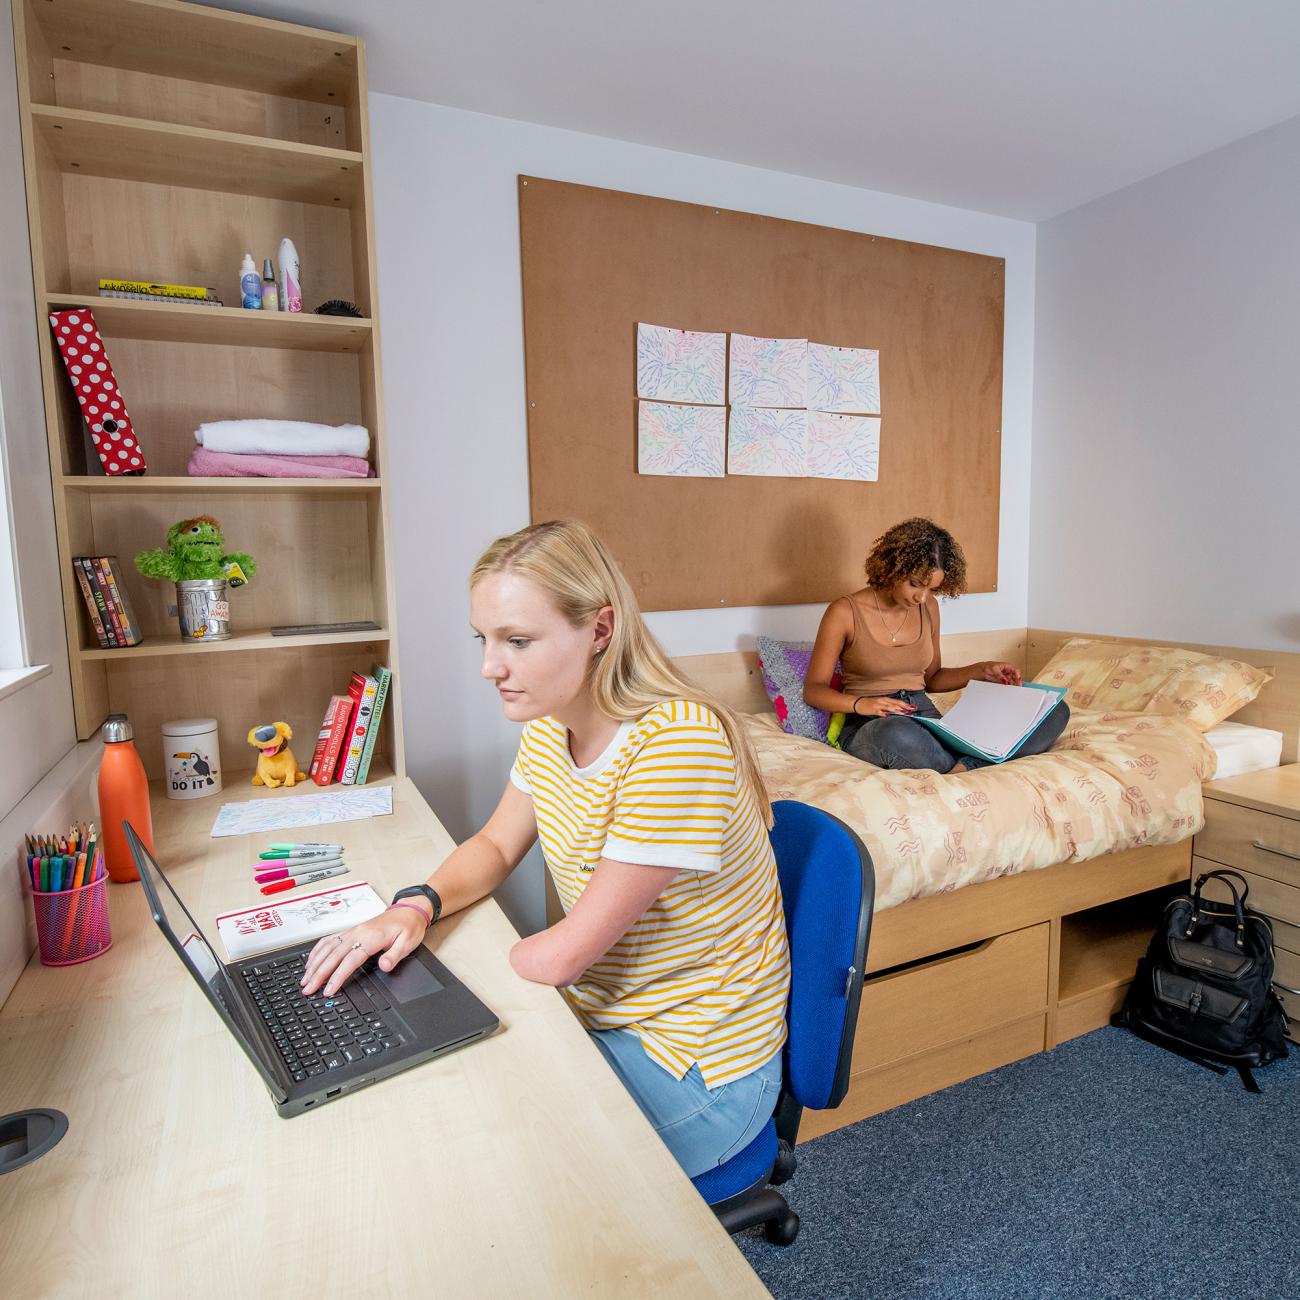 Two students in a bedroom. One sits reading on a single bed while the other works on a laptop, sat at a desk beside a window.